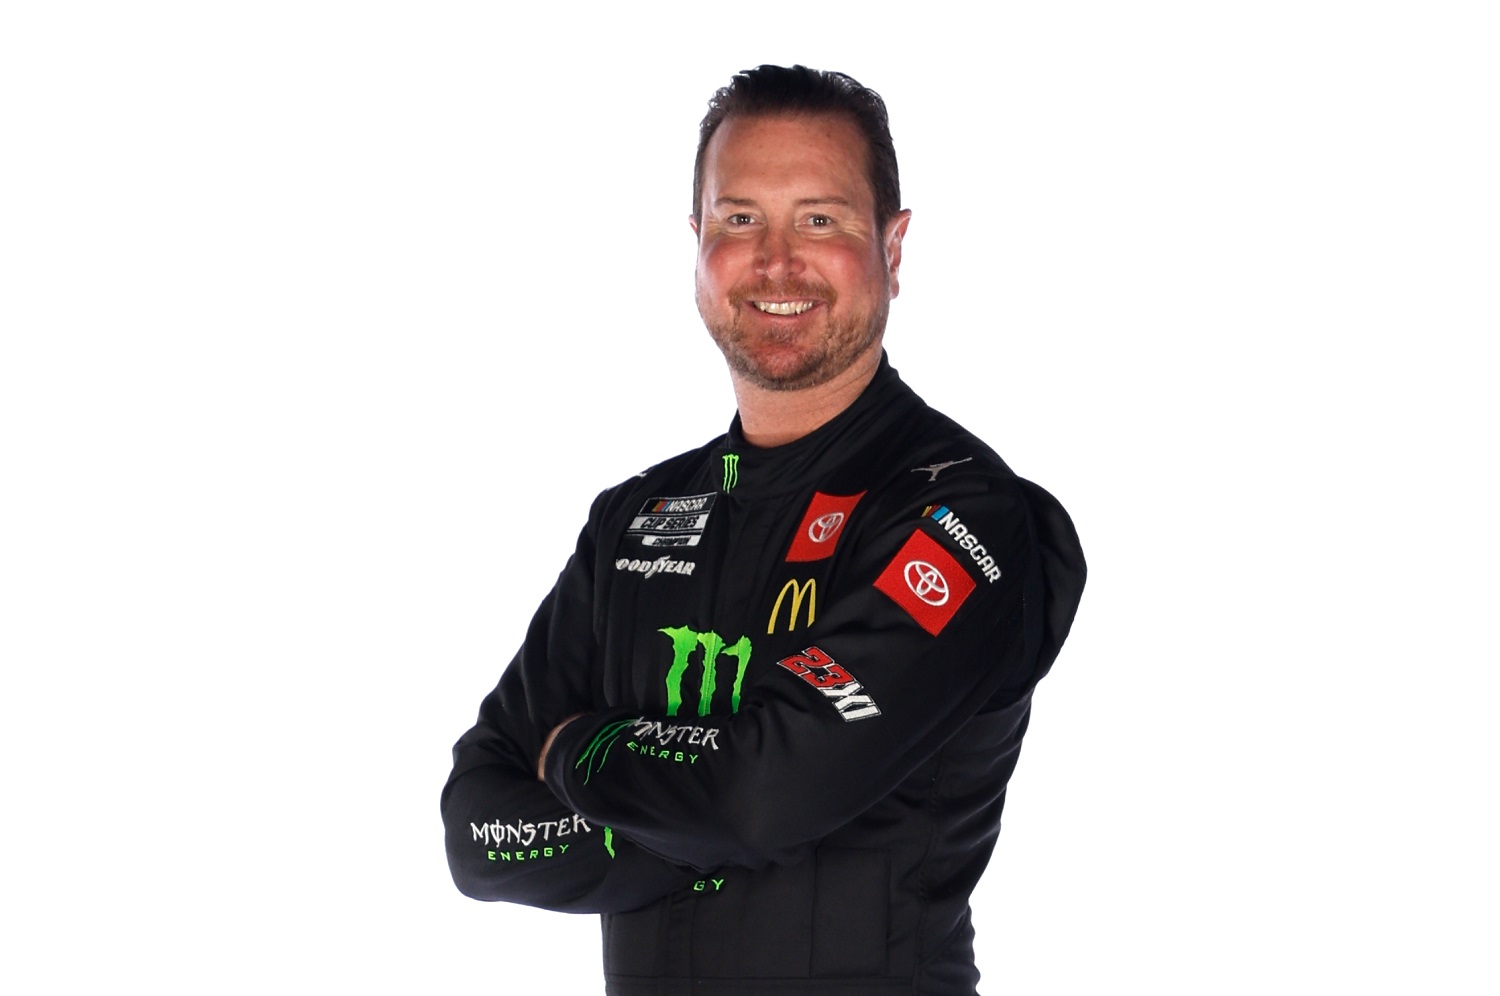 NASCAR driver Kurt Busch poses for a photo during NASCAR Production Days at Clutch Studios on Jan. 19, 2022, in Concord, North Carolina. | Chris Graythen/Getty Images